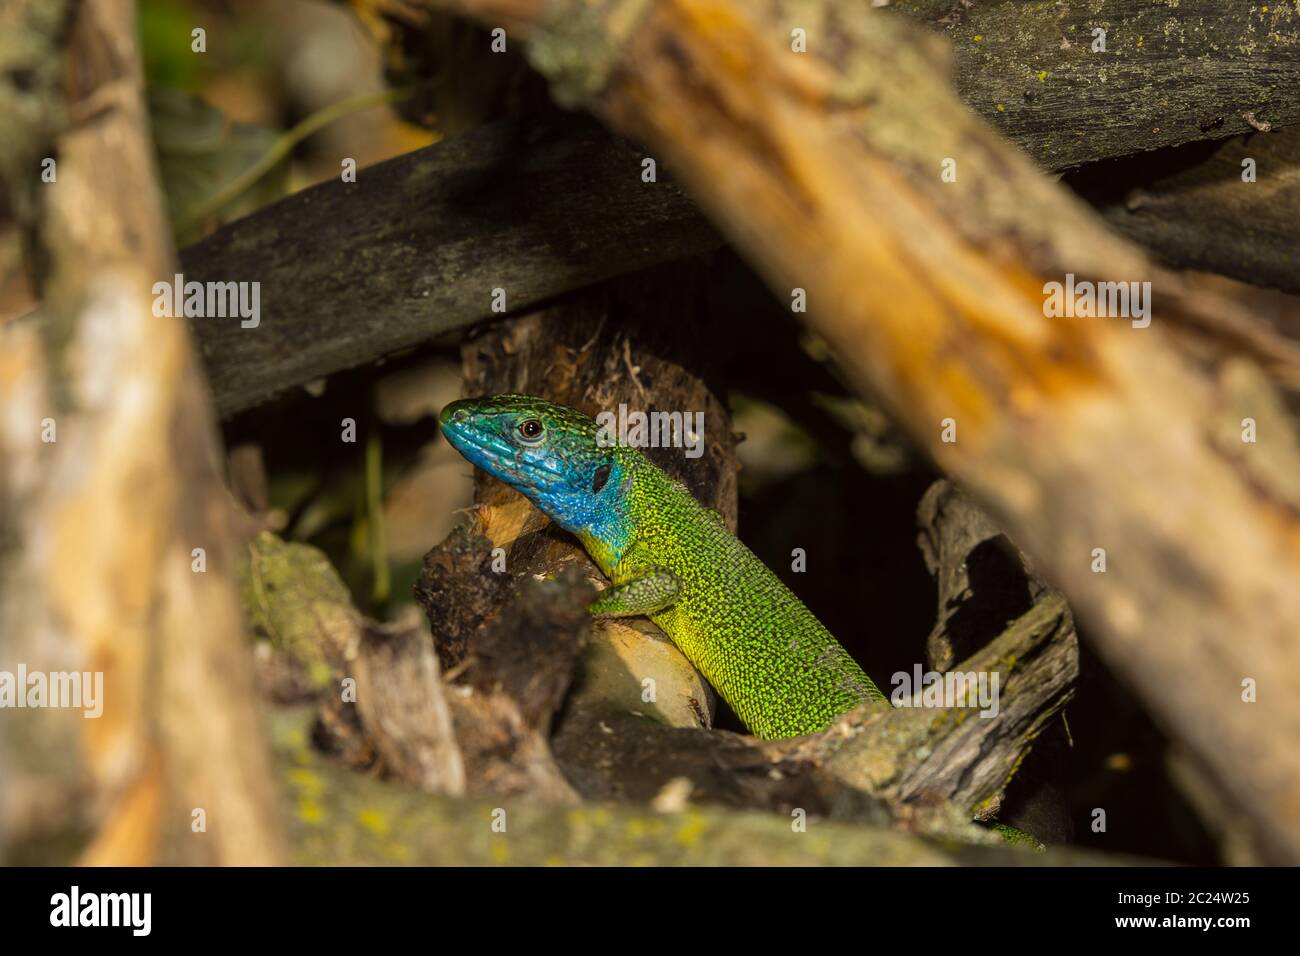 a colorful lizard Stock Photo